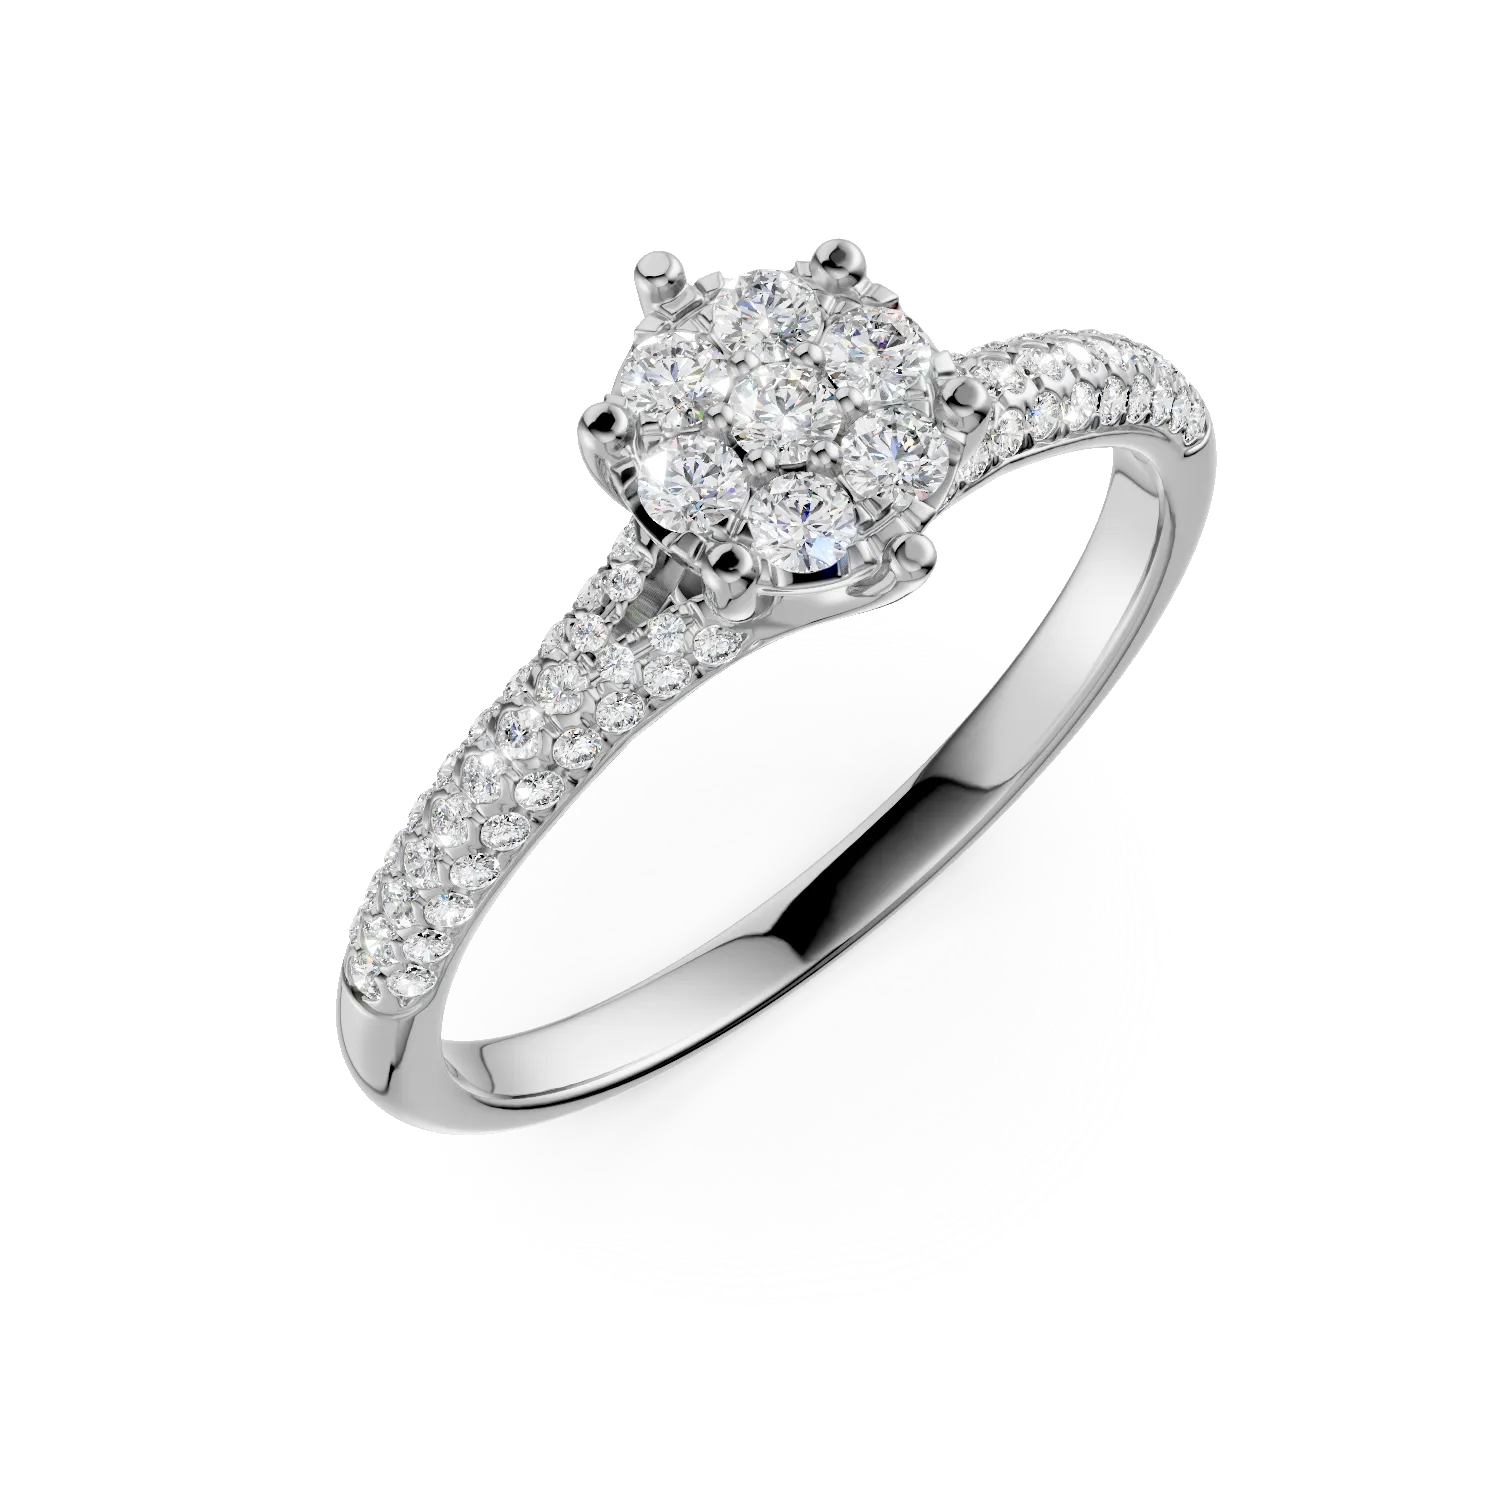 White gold engagement ring with 0.39ct diamonds